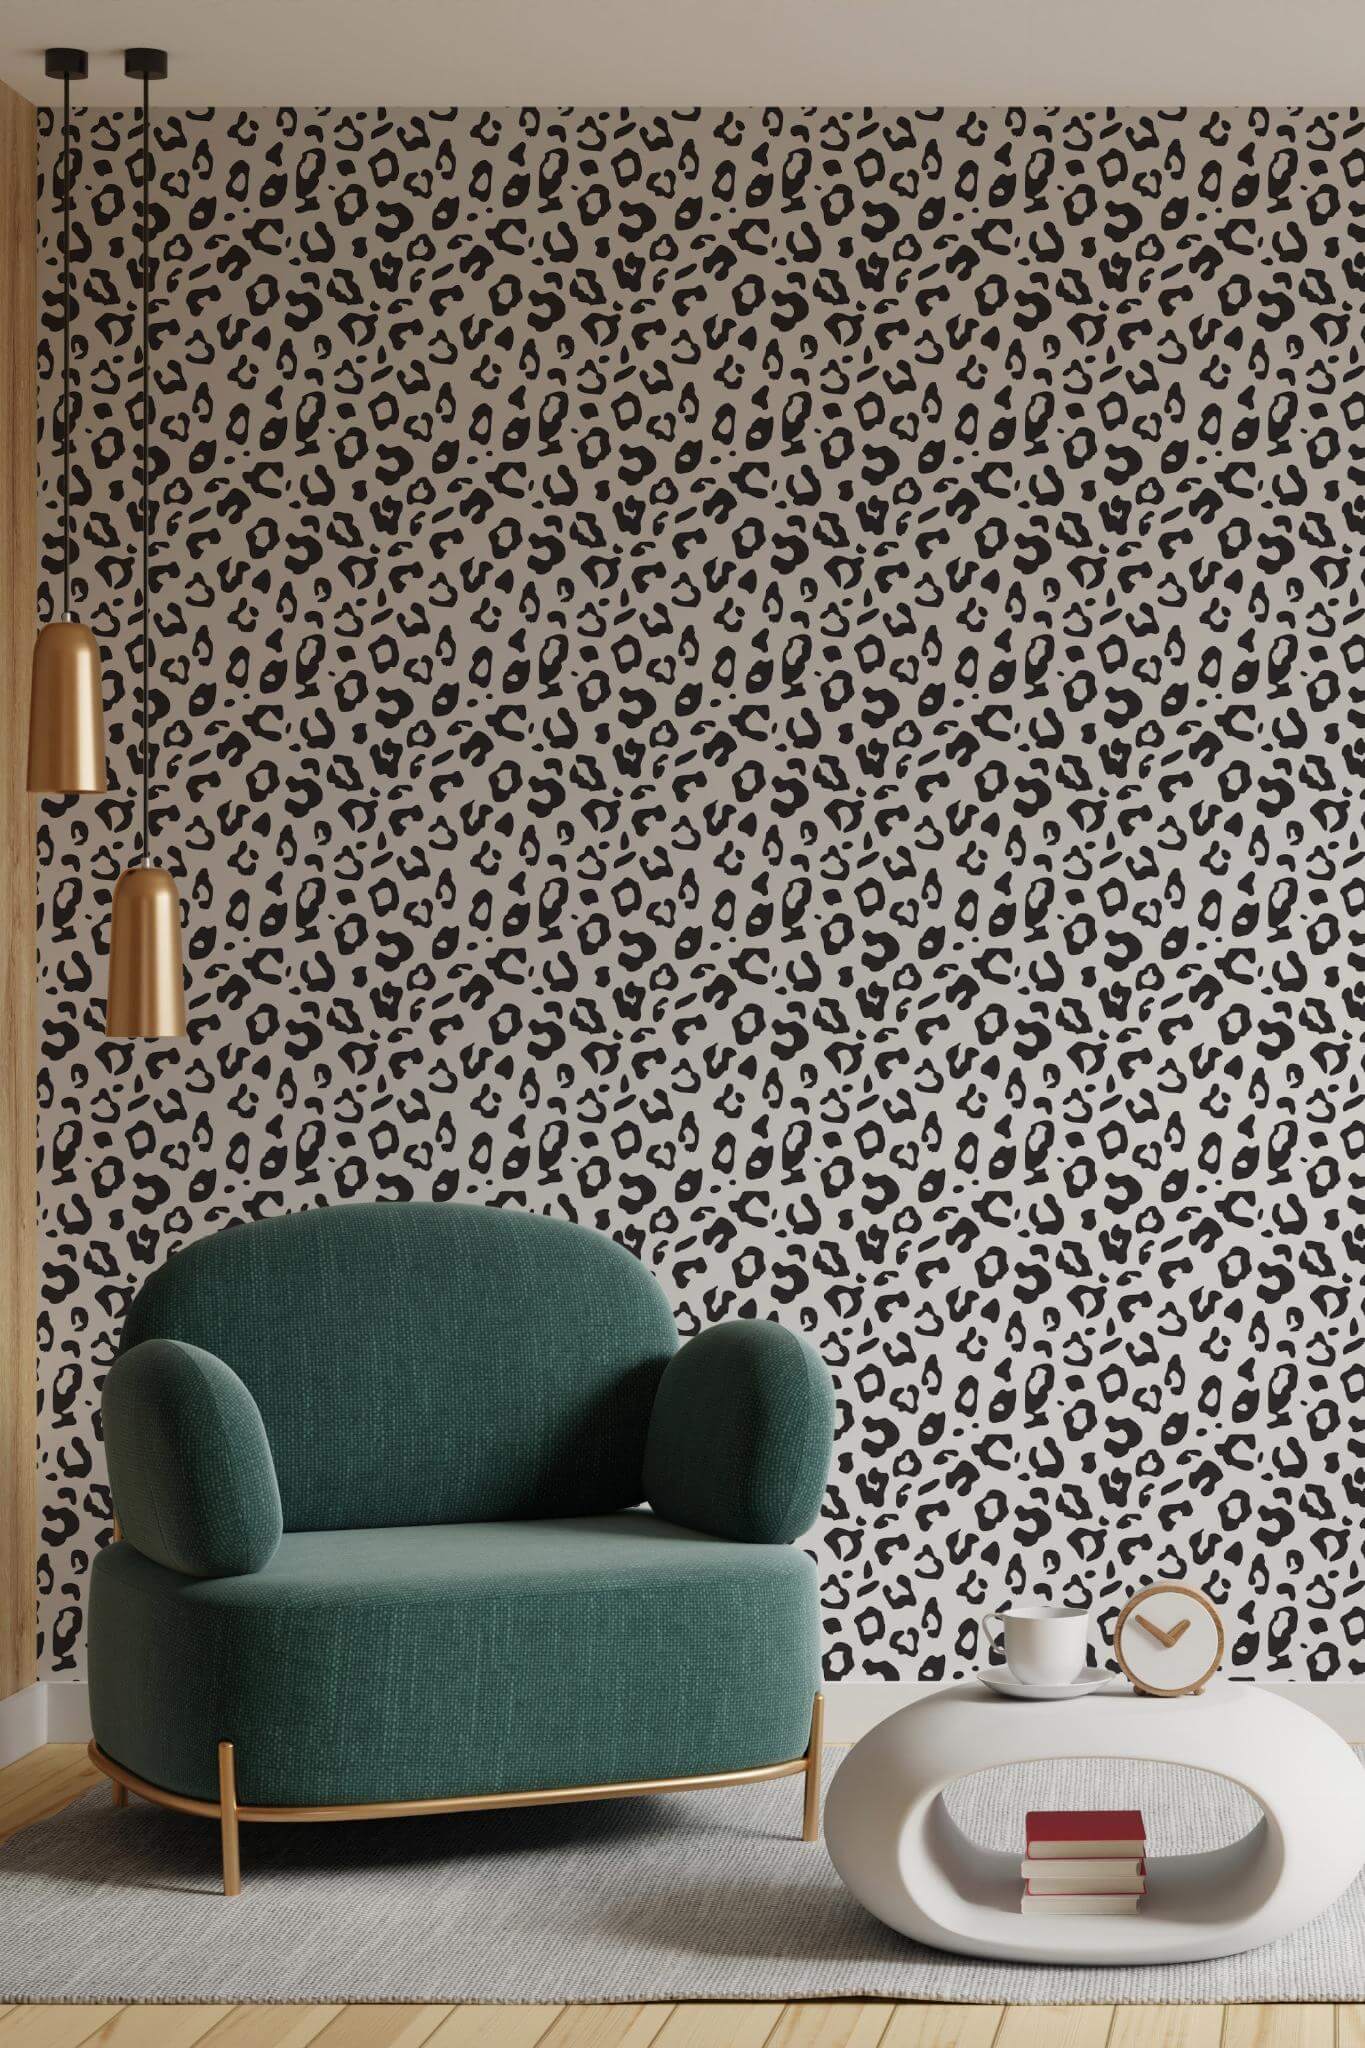 Buy Cheetah Print Wallpaper Leopard Animal Print by Charlottewinter Custom  Printed Removable Self Adhesive Wallpaper Roll by Spoonflower Online in  India 